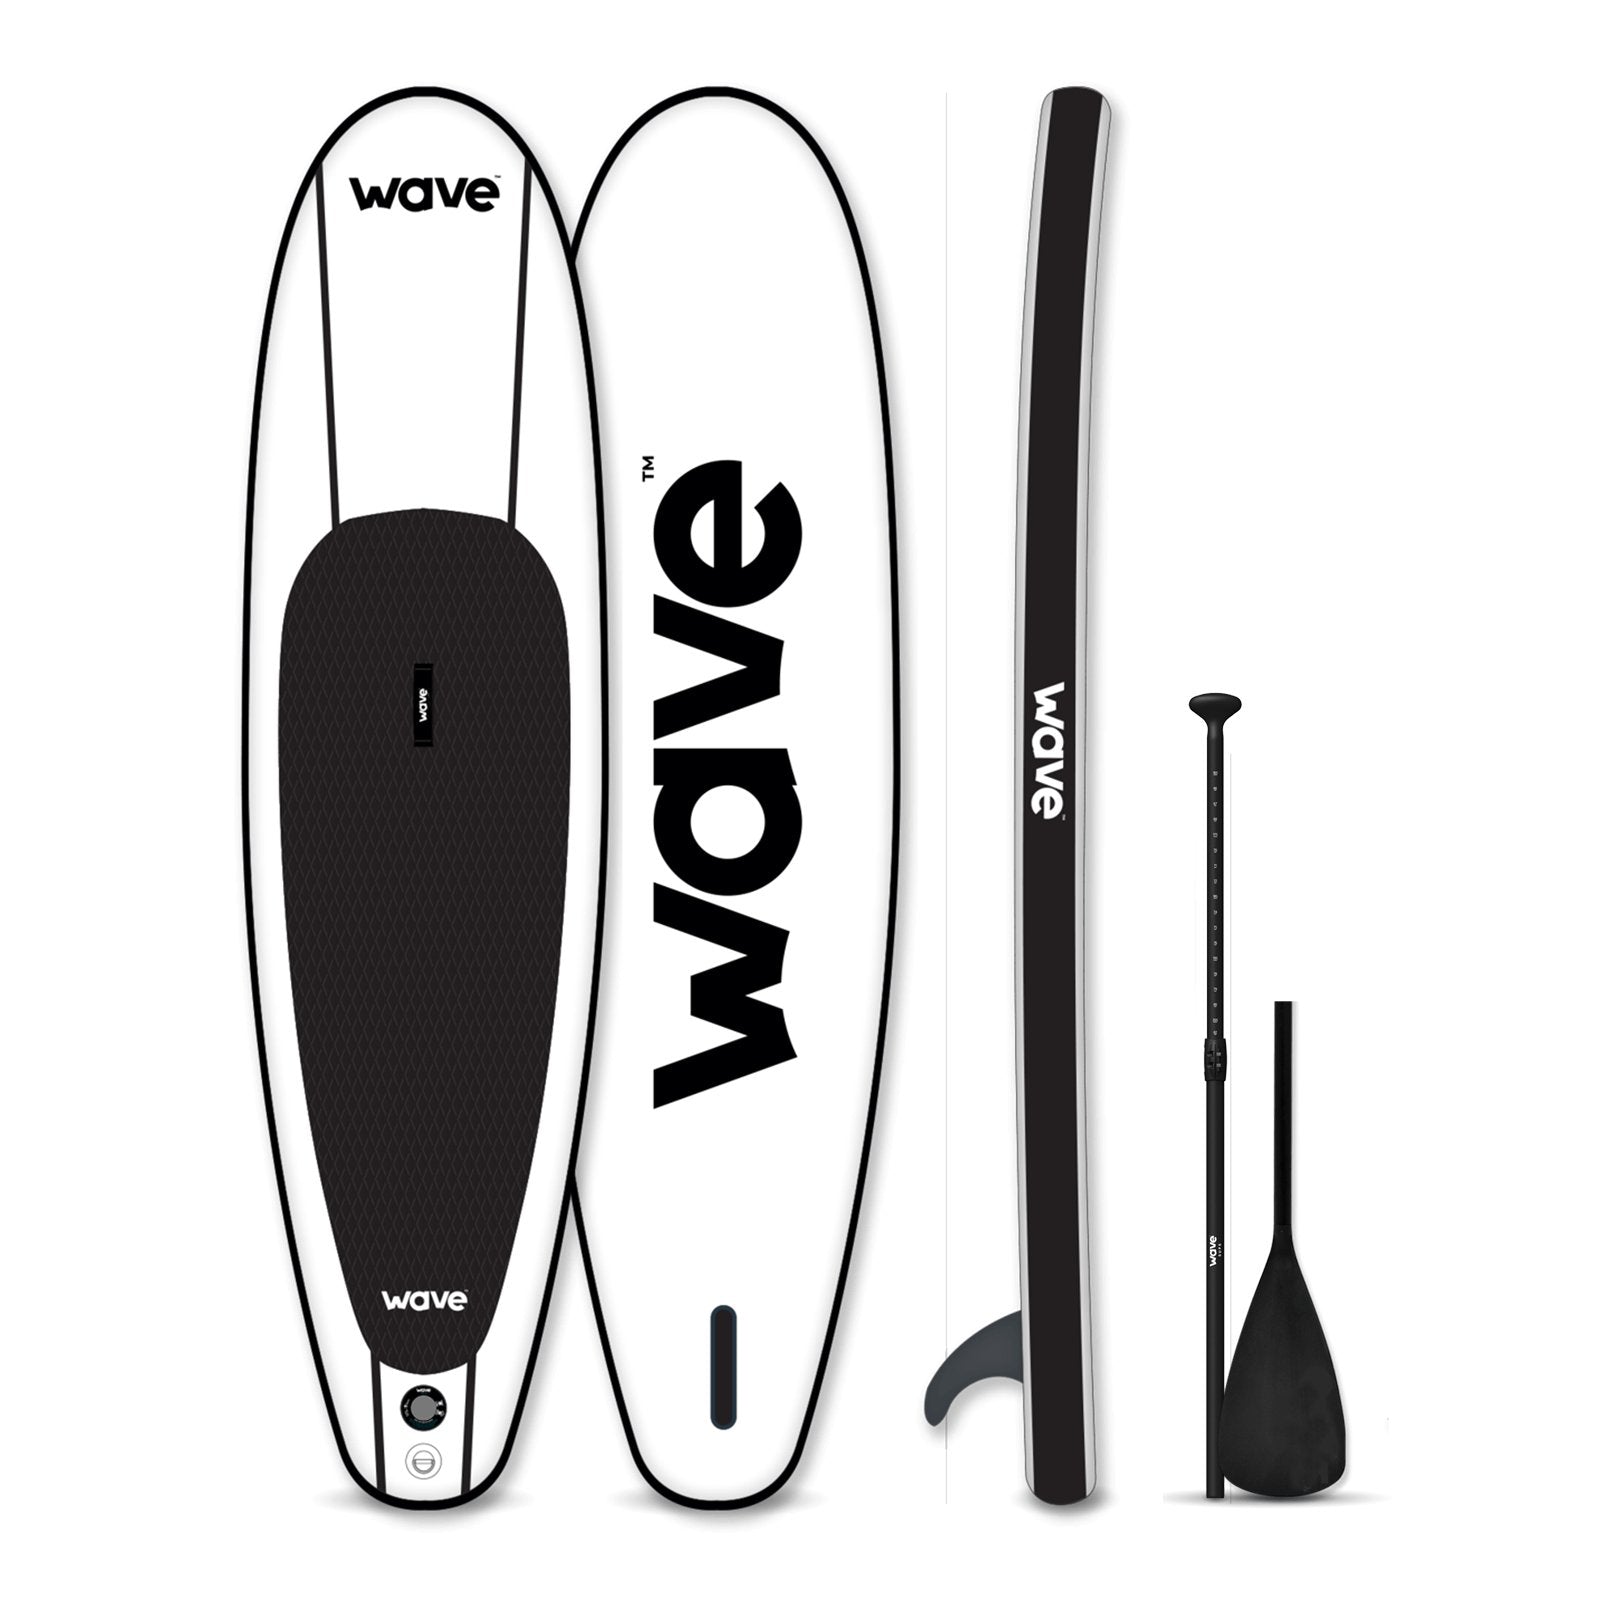 Classic SUP | Inflatable Stand-Up Paddleboard | 10ft | Black & White - Wave Sups Inflatable Paddle boards